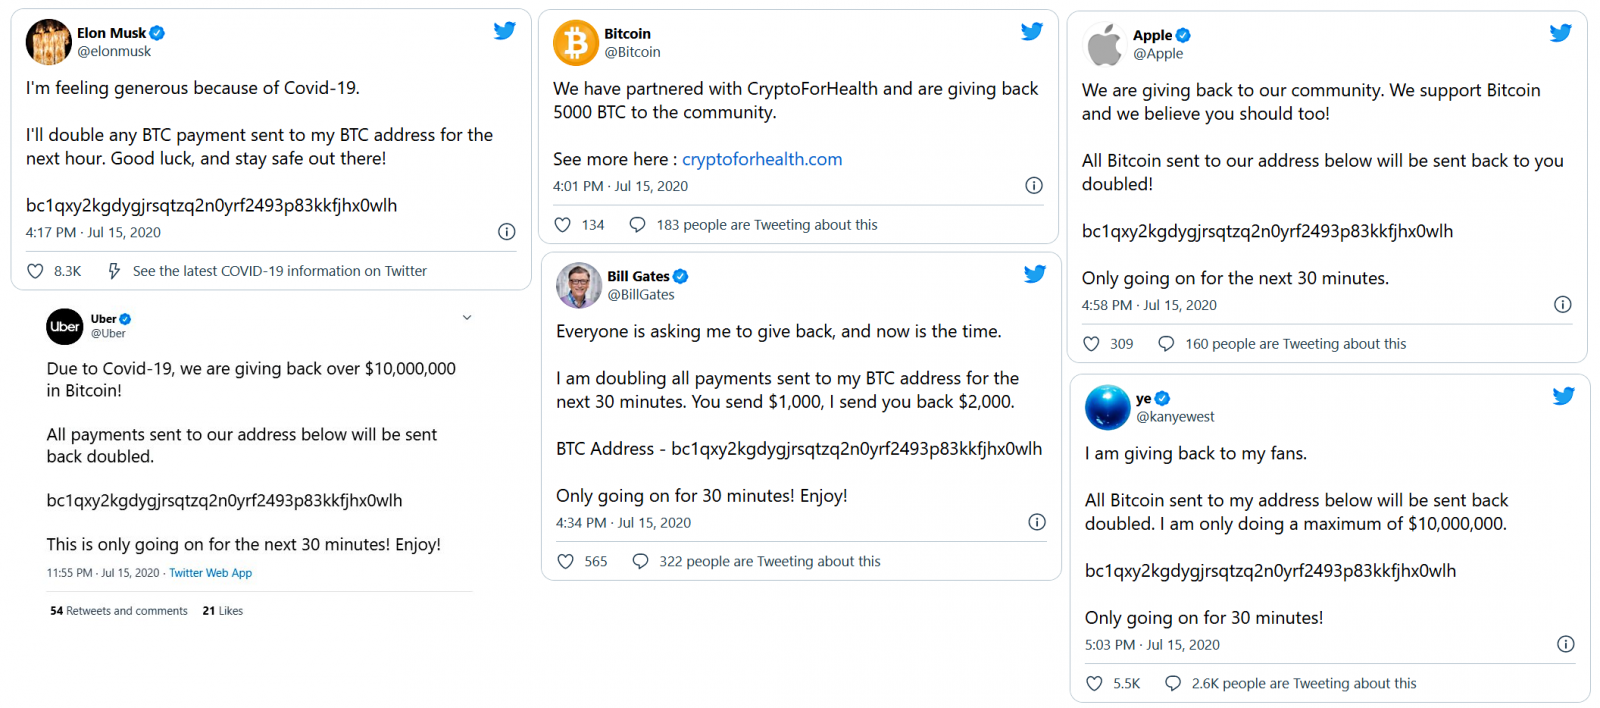 Hijacked Twitter accounts used to push the Bitcoin scam